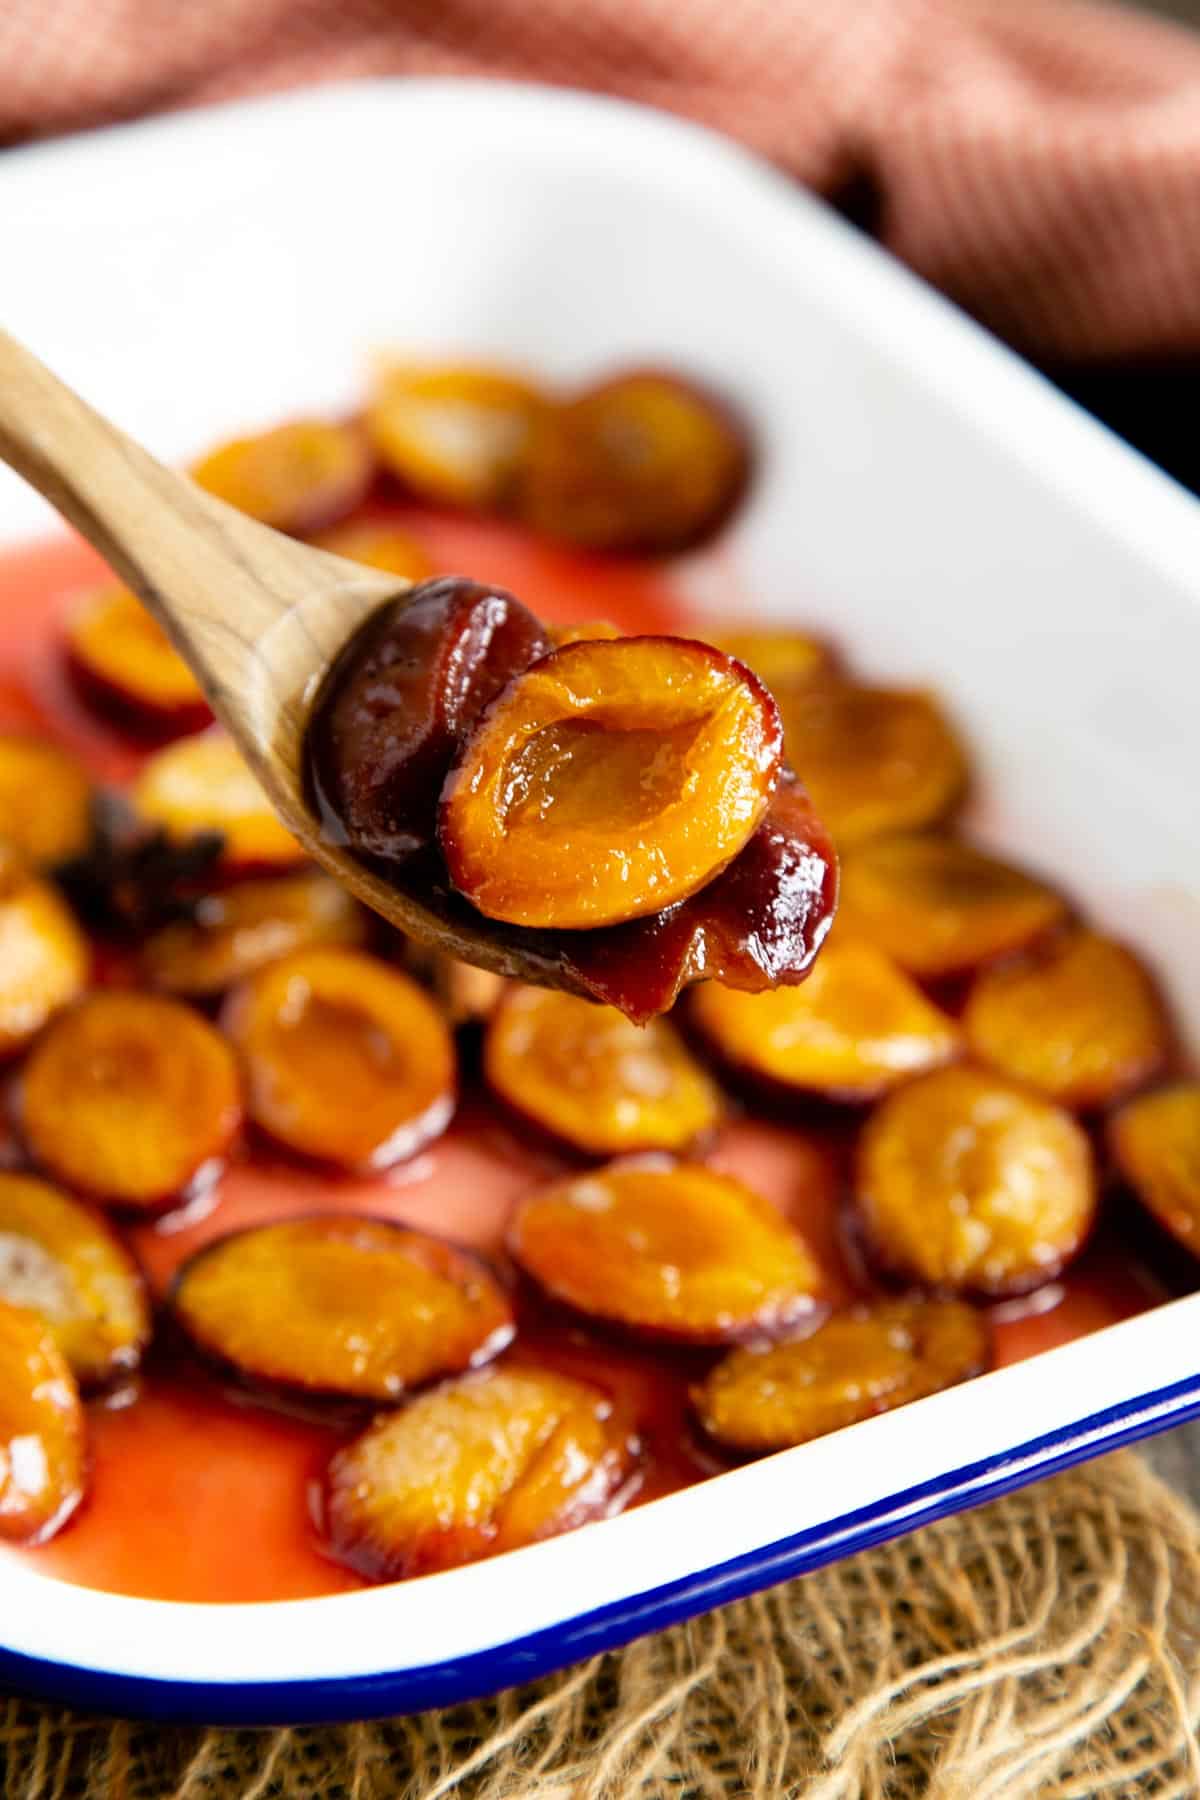 Delicious soft and flavourful roasted plums, being served from their white enamel roasting dish.